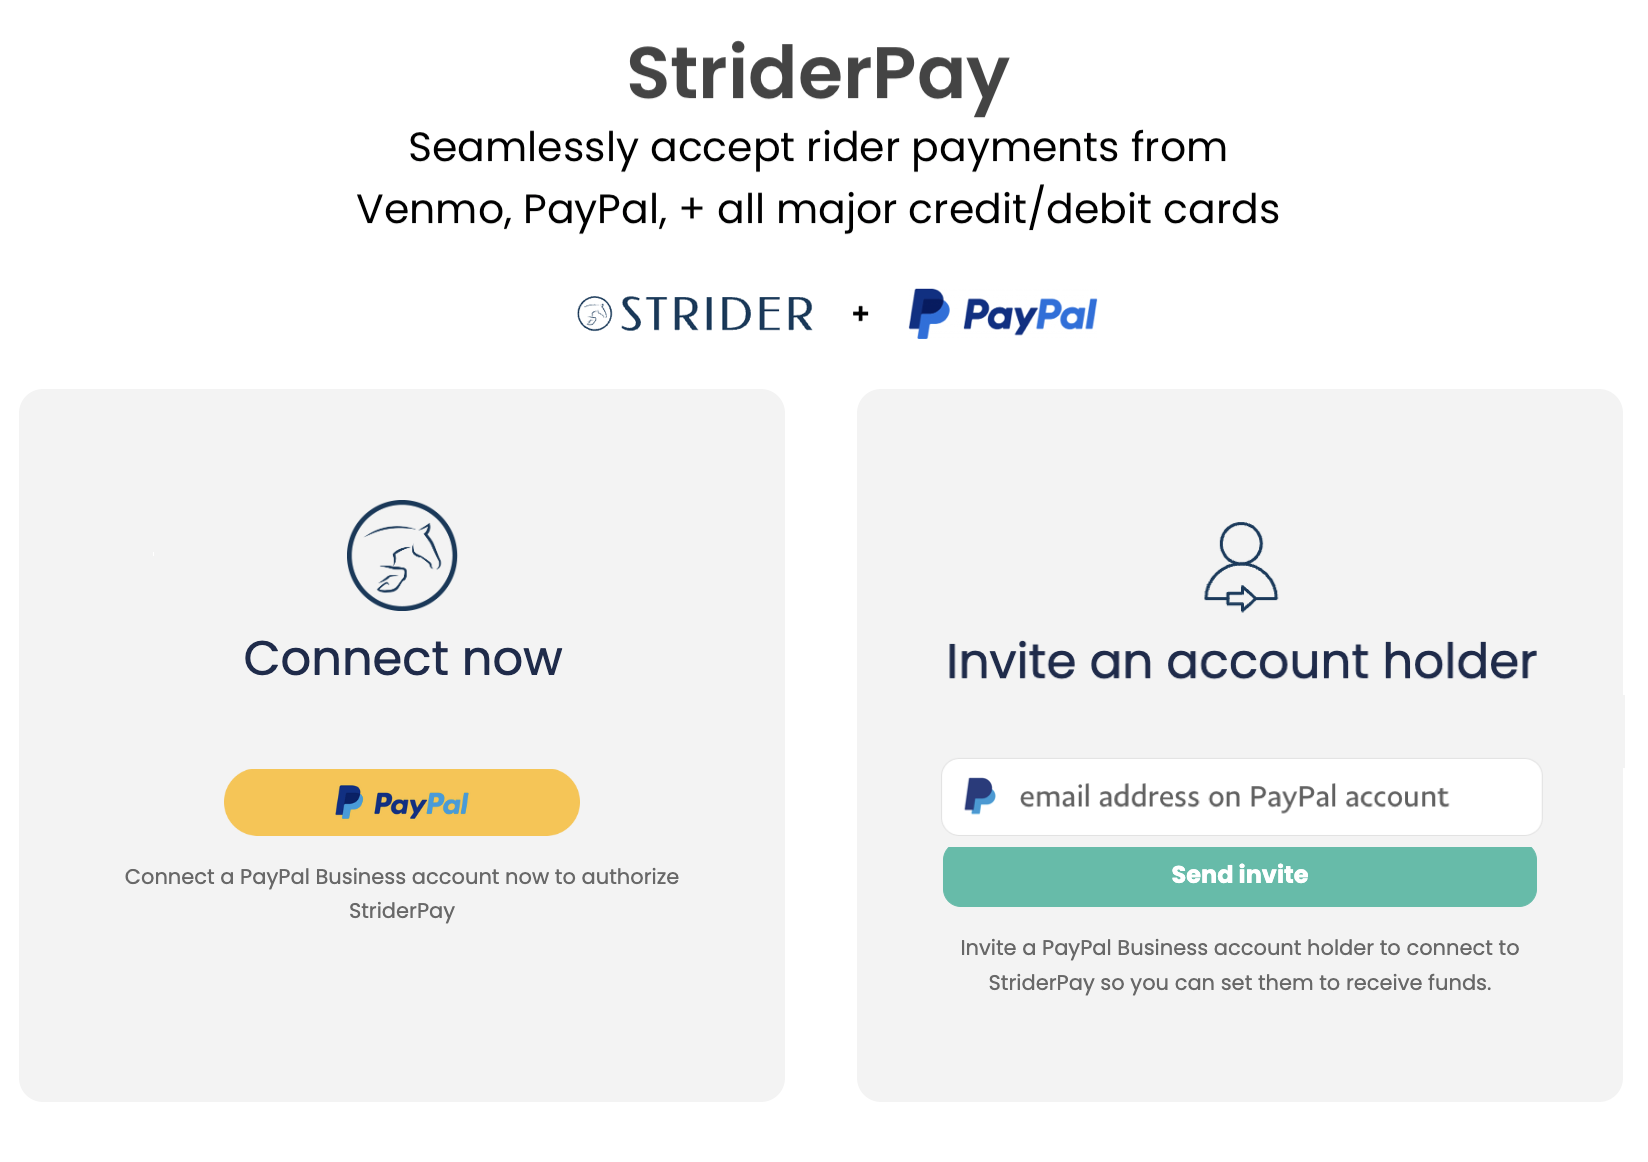 ConnectToStriderPay